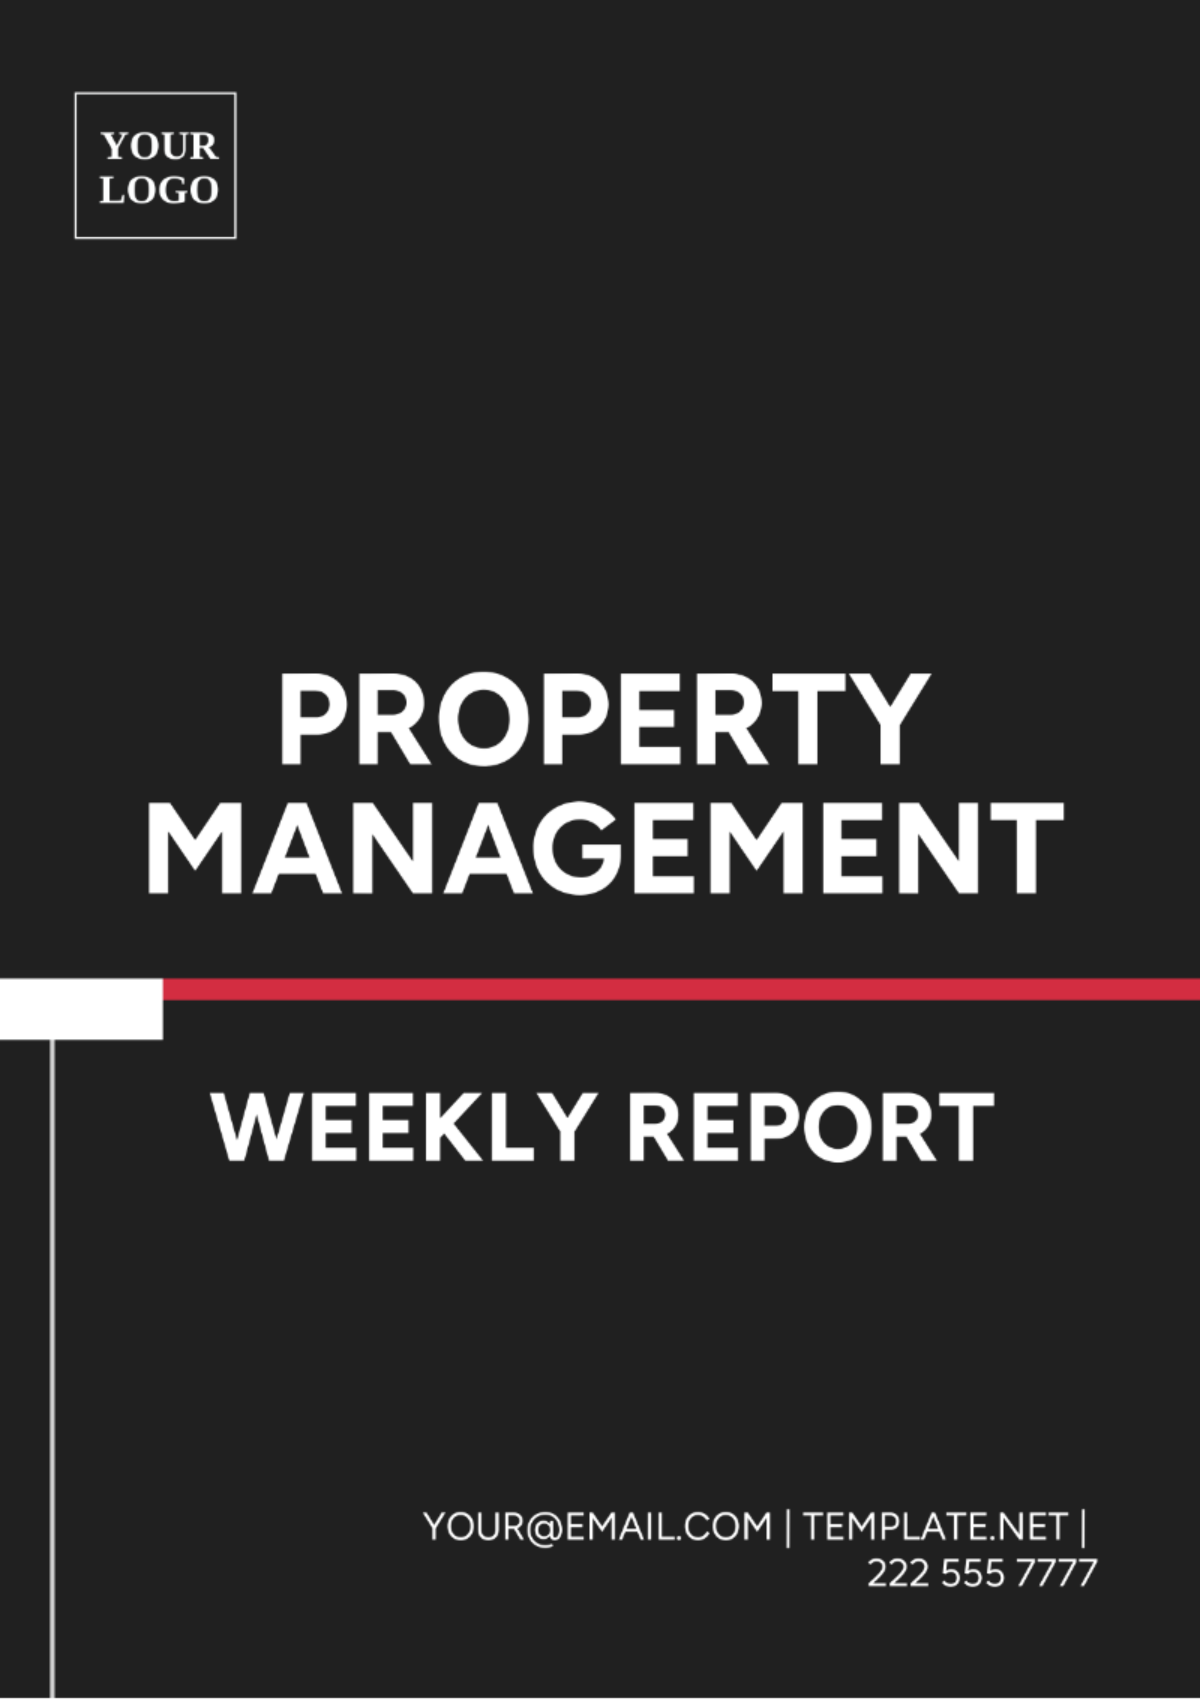 Property Management Weekly Report Template